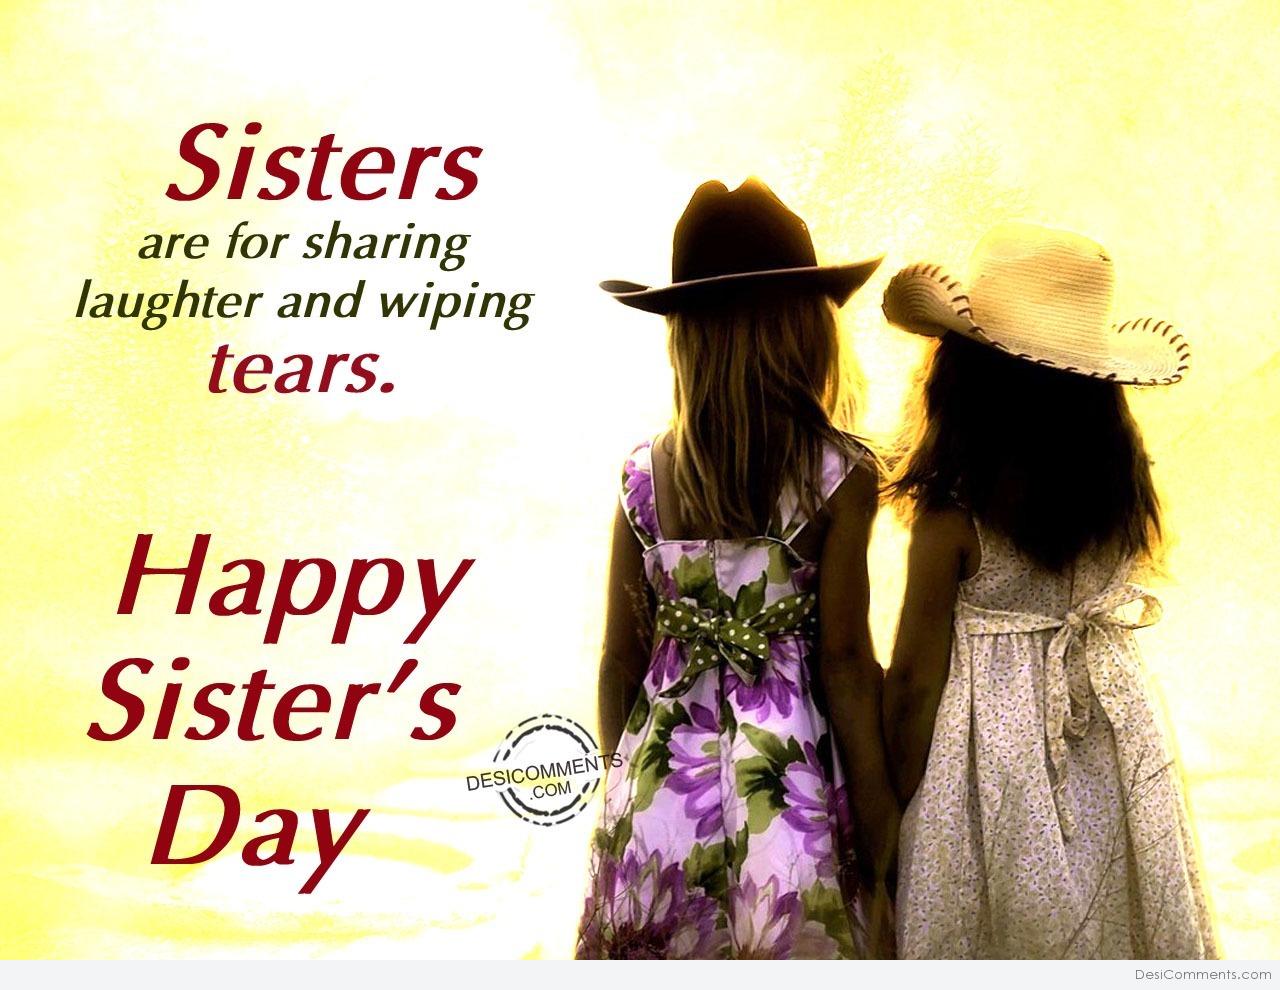 Sisters are for sharing tears,Happy Sister's Day - DesiComments.com